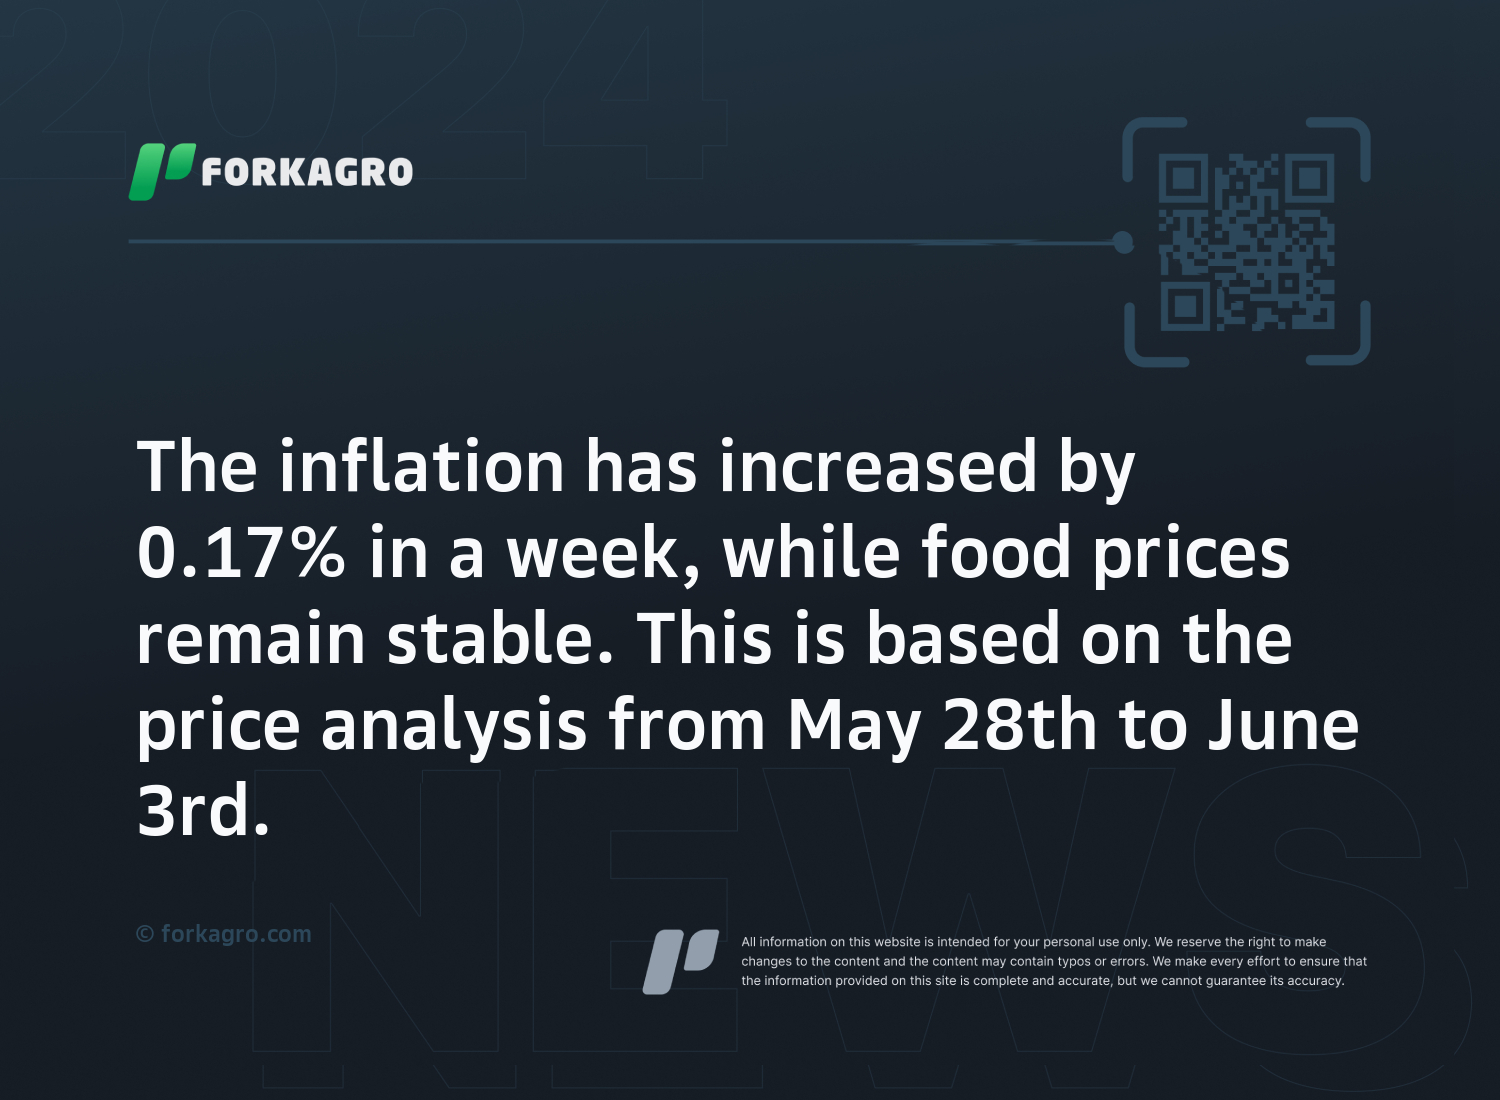 The inflation has increased by 0.17% in a week, while food prices remain stable. This is based on the price analysis from May 28th to June 3rd.